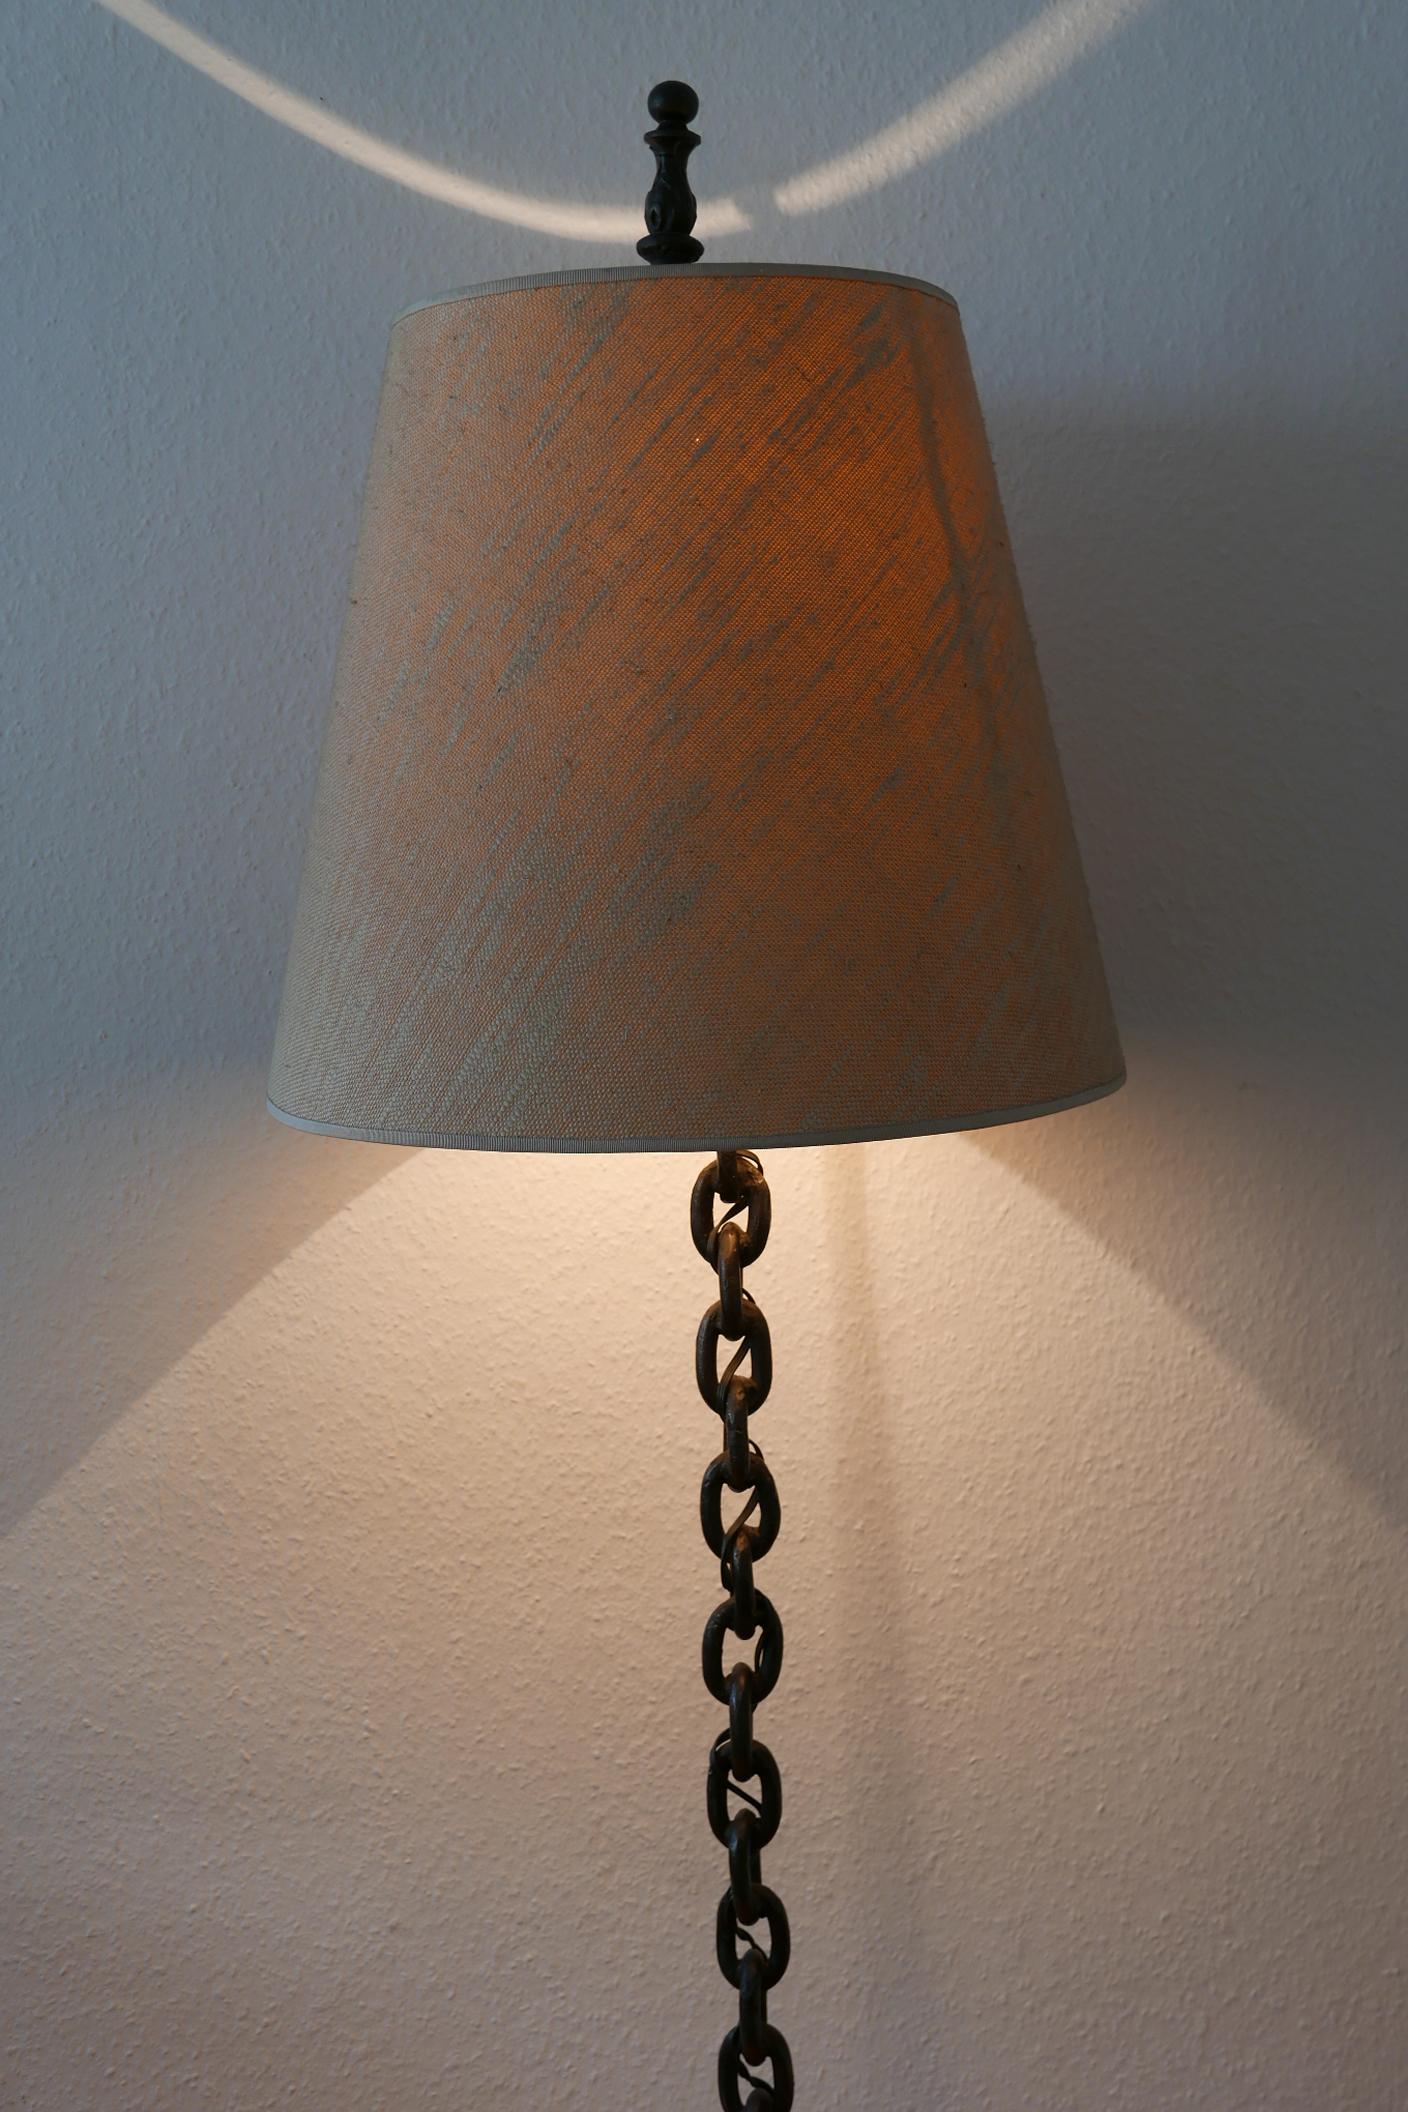 Mid-Century Modern Franz West Style Wrought Iron Chain Floor Lamp 1960s, Germany For Sale 2